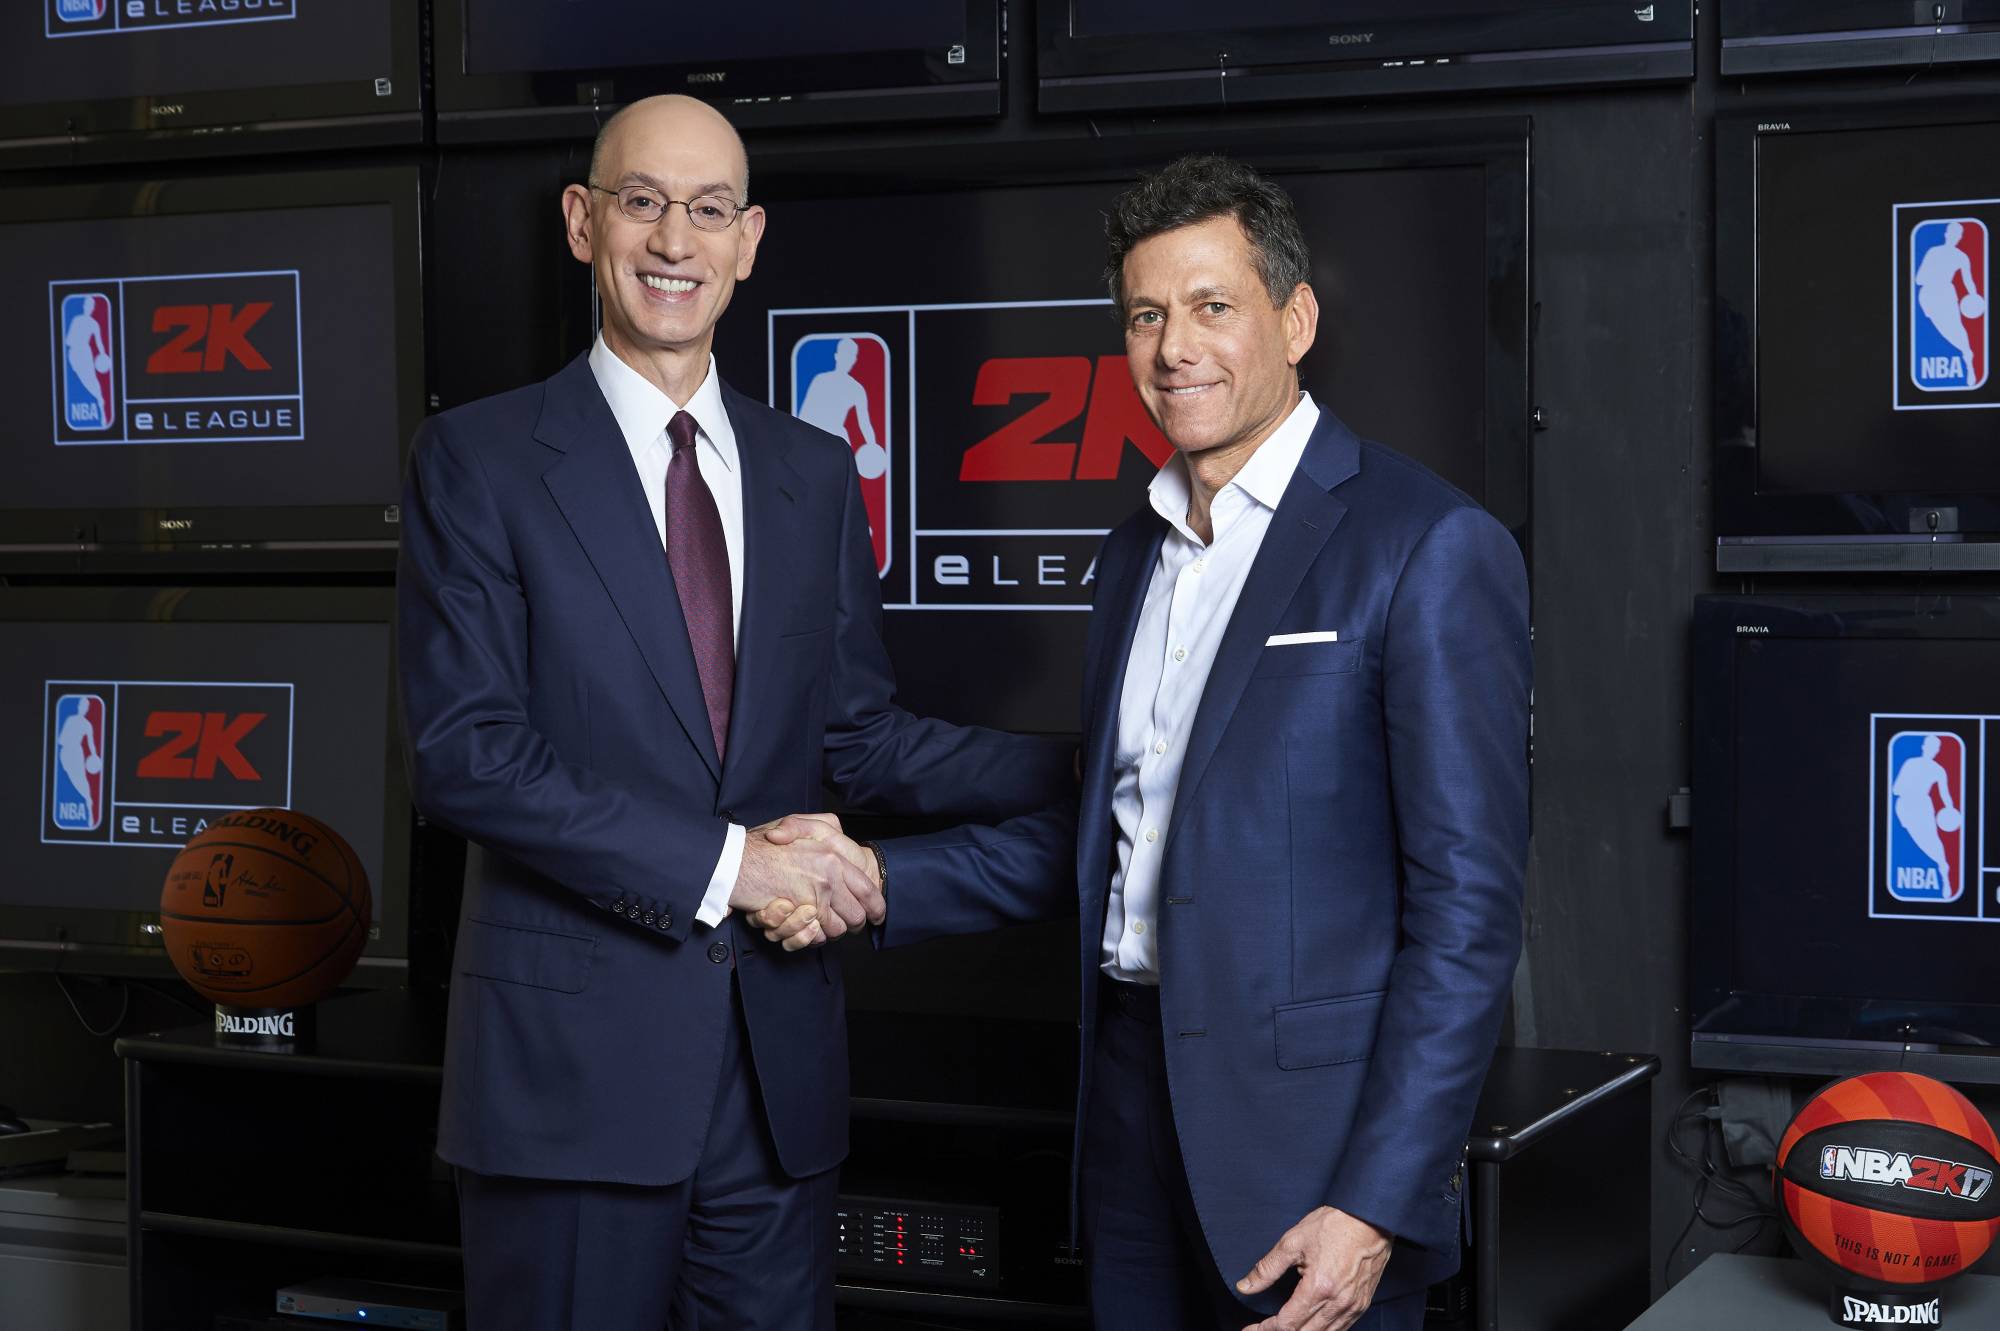 Take-Two Interactive partners with the NBA to create 'NBA 2K' eSports league